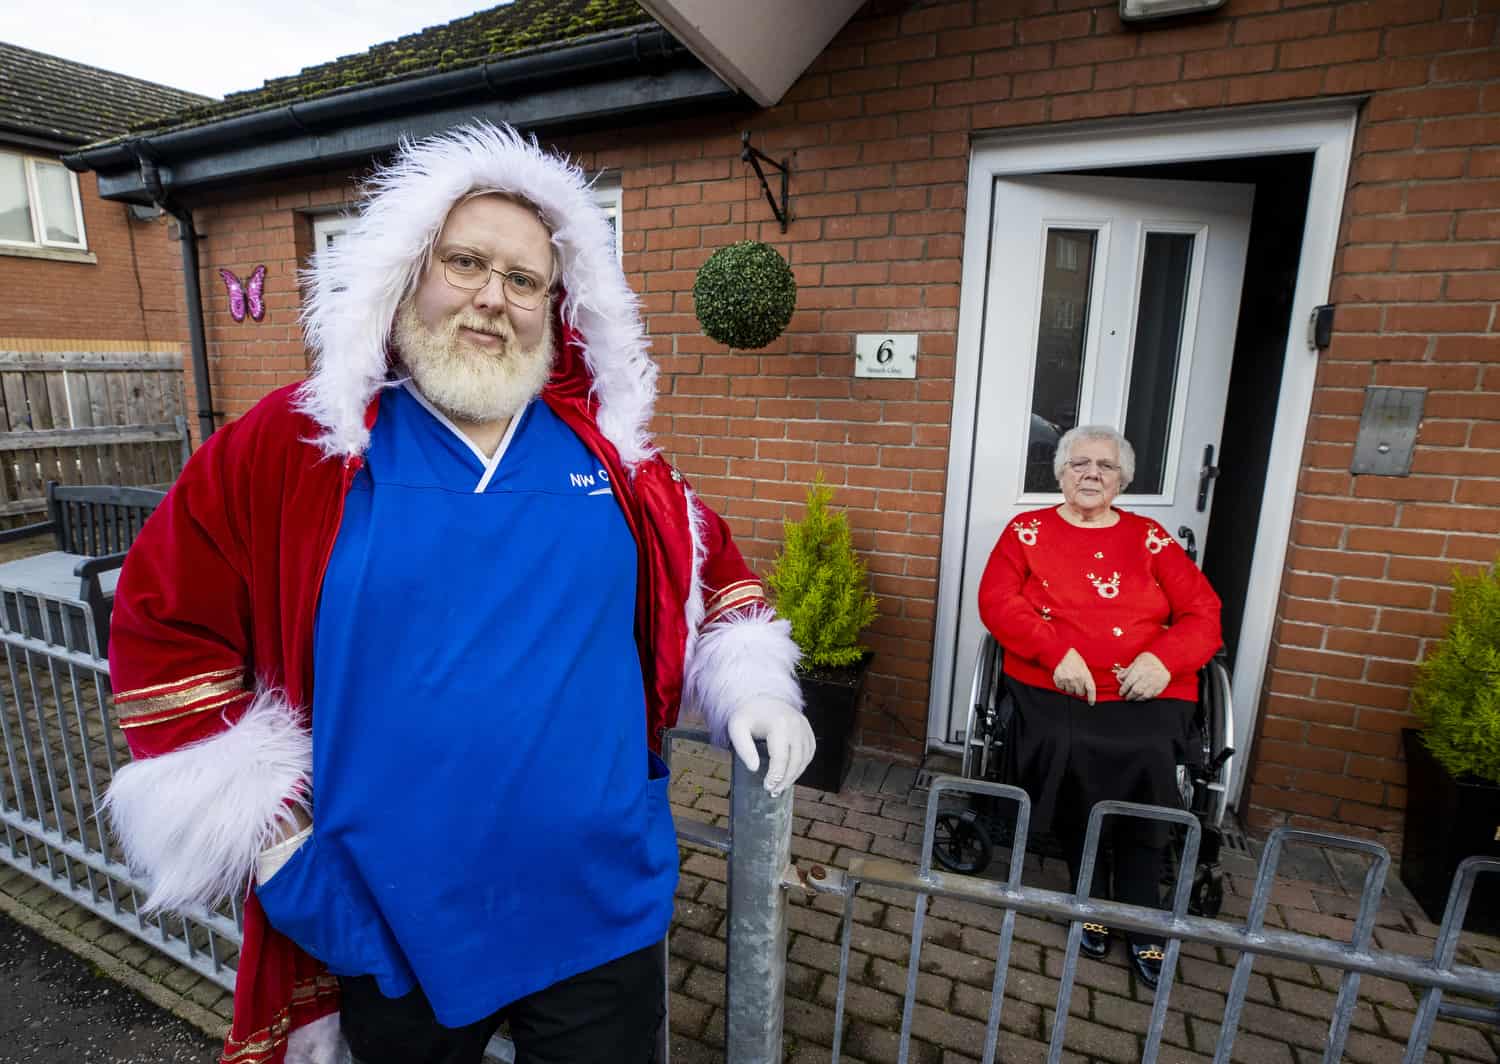 Santa lookalike care worker delivers festive cheer on home visits